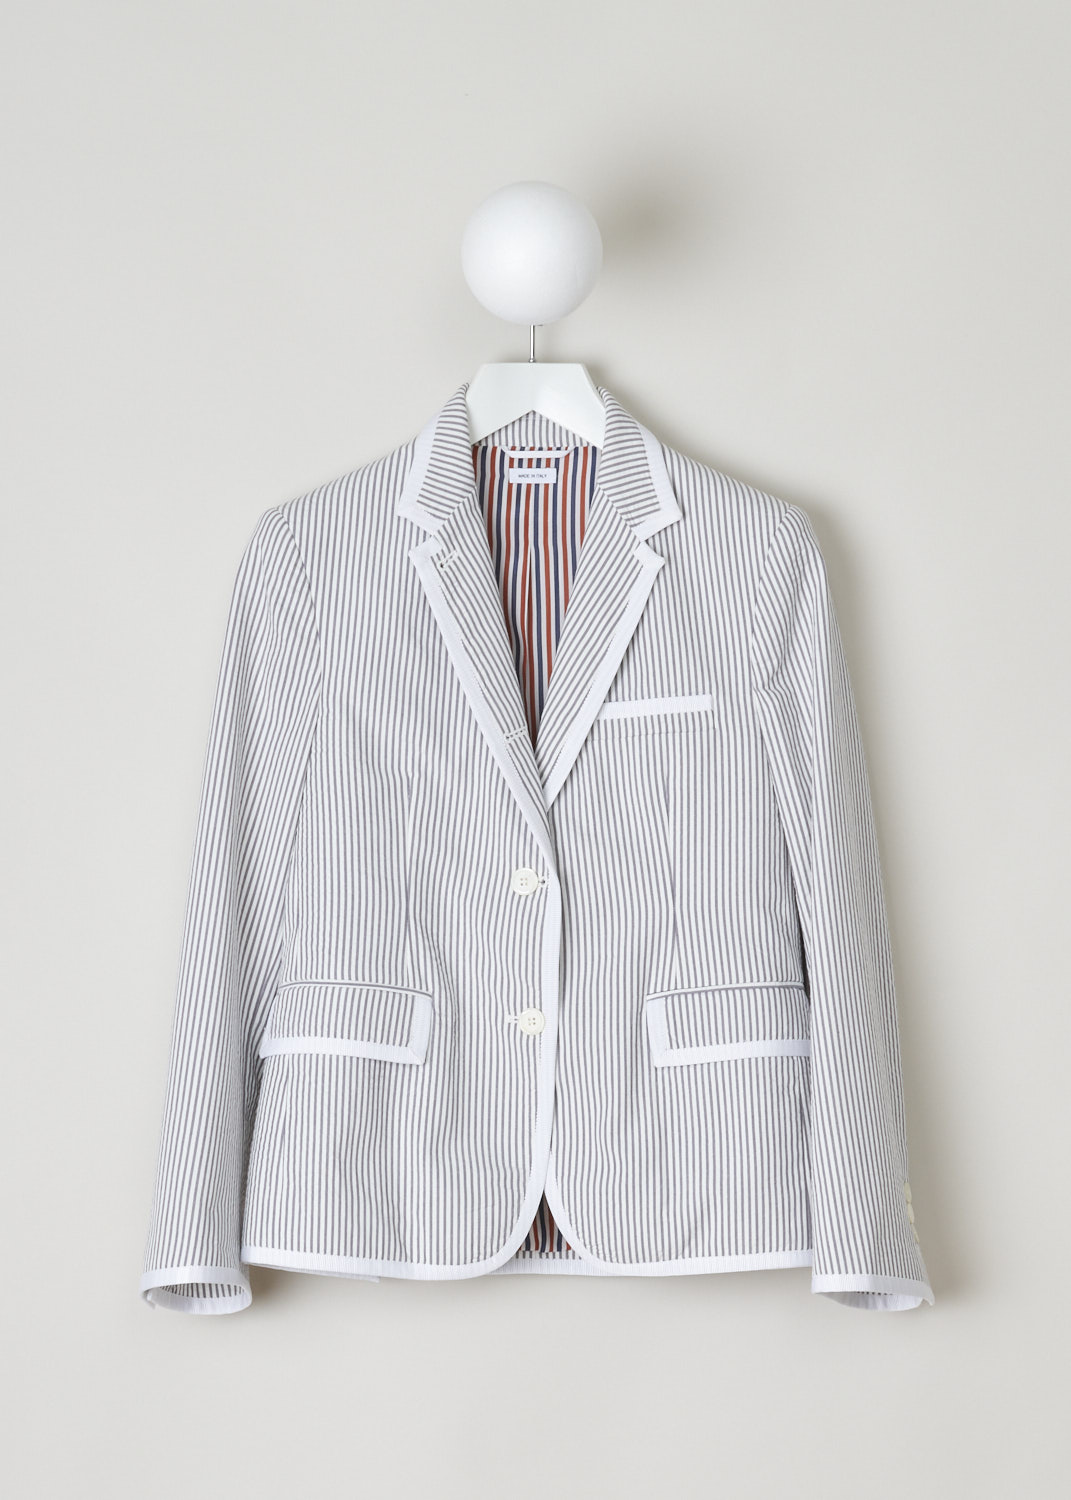 Thom Browne, white and grey striped blazer, FBC492B_00572_035, white grey, front, Classic blazer reimagined with the seersucker cotton fabric, and the lovely striped motif. Featuring a collar that leads into the notched lapel, further decorating the front are two flap pockets and a single chest pocket. A notable feature here is that all the edges and hems are adorned with a white trim. On the back you will find two off-center splits. 